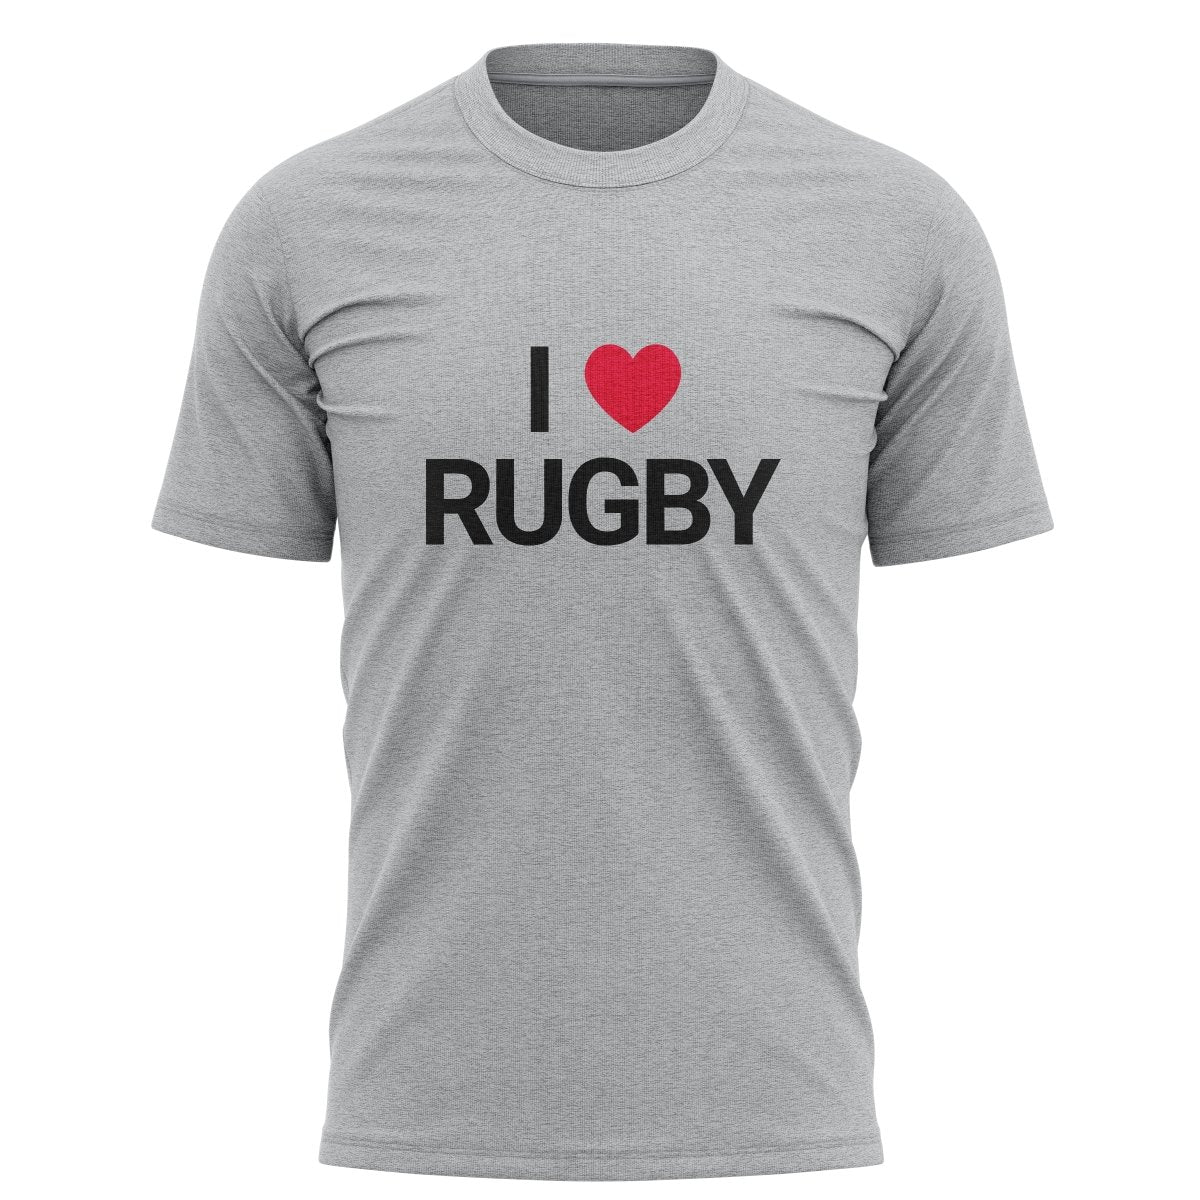 I Love Rugby Graphic Tee - www.therugbyshop.com www.therugbyshop.com MEN&#39;S / HEATHER GREY / S SANMAR TEES I Love Rugby Graphic Tee